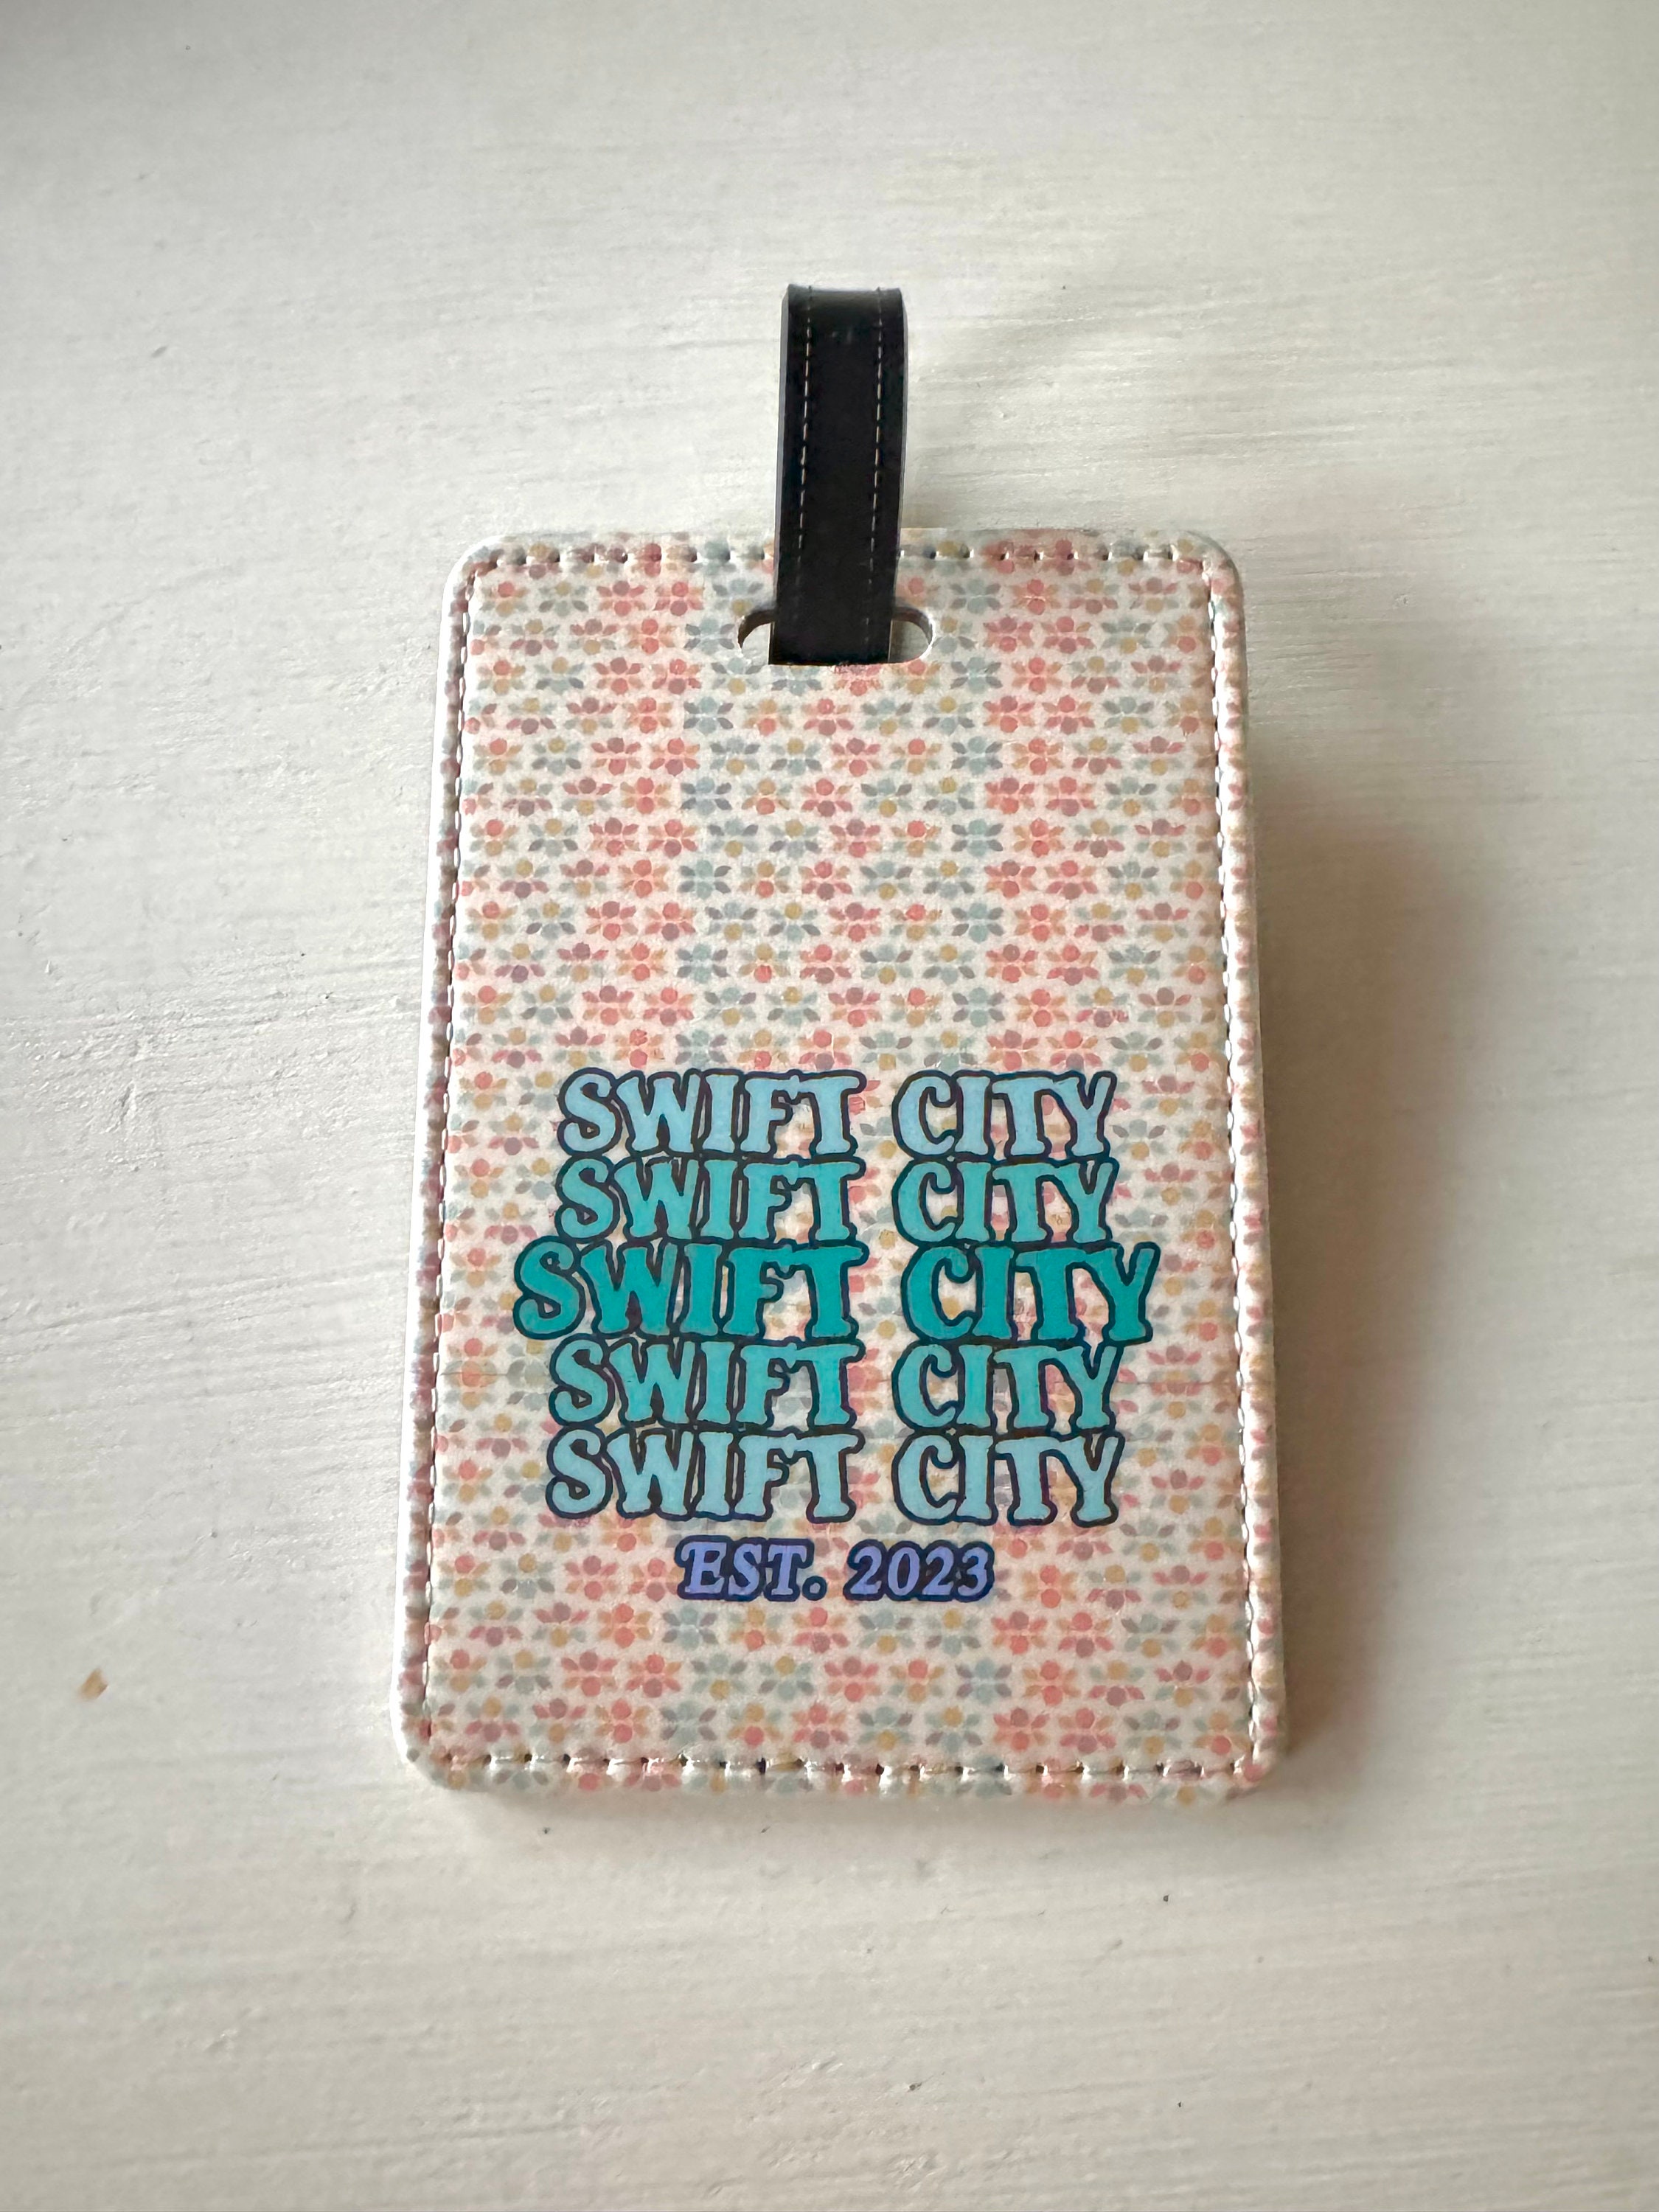 It Was Rare Commemorative 2023 or 2024 Keychain Taylor